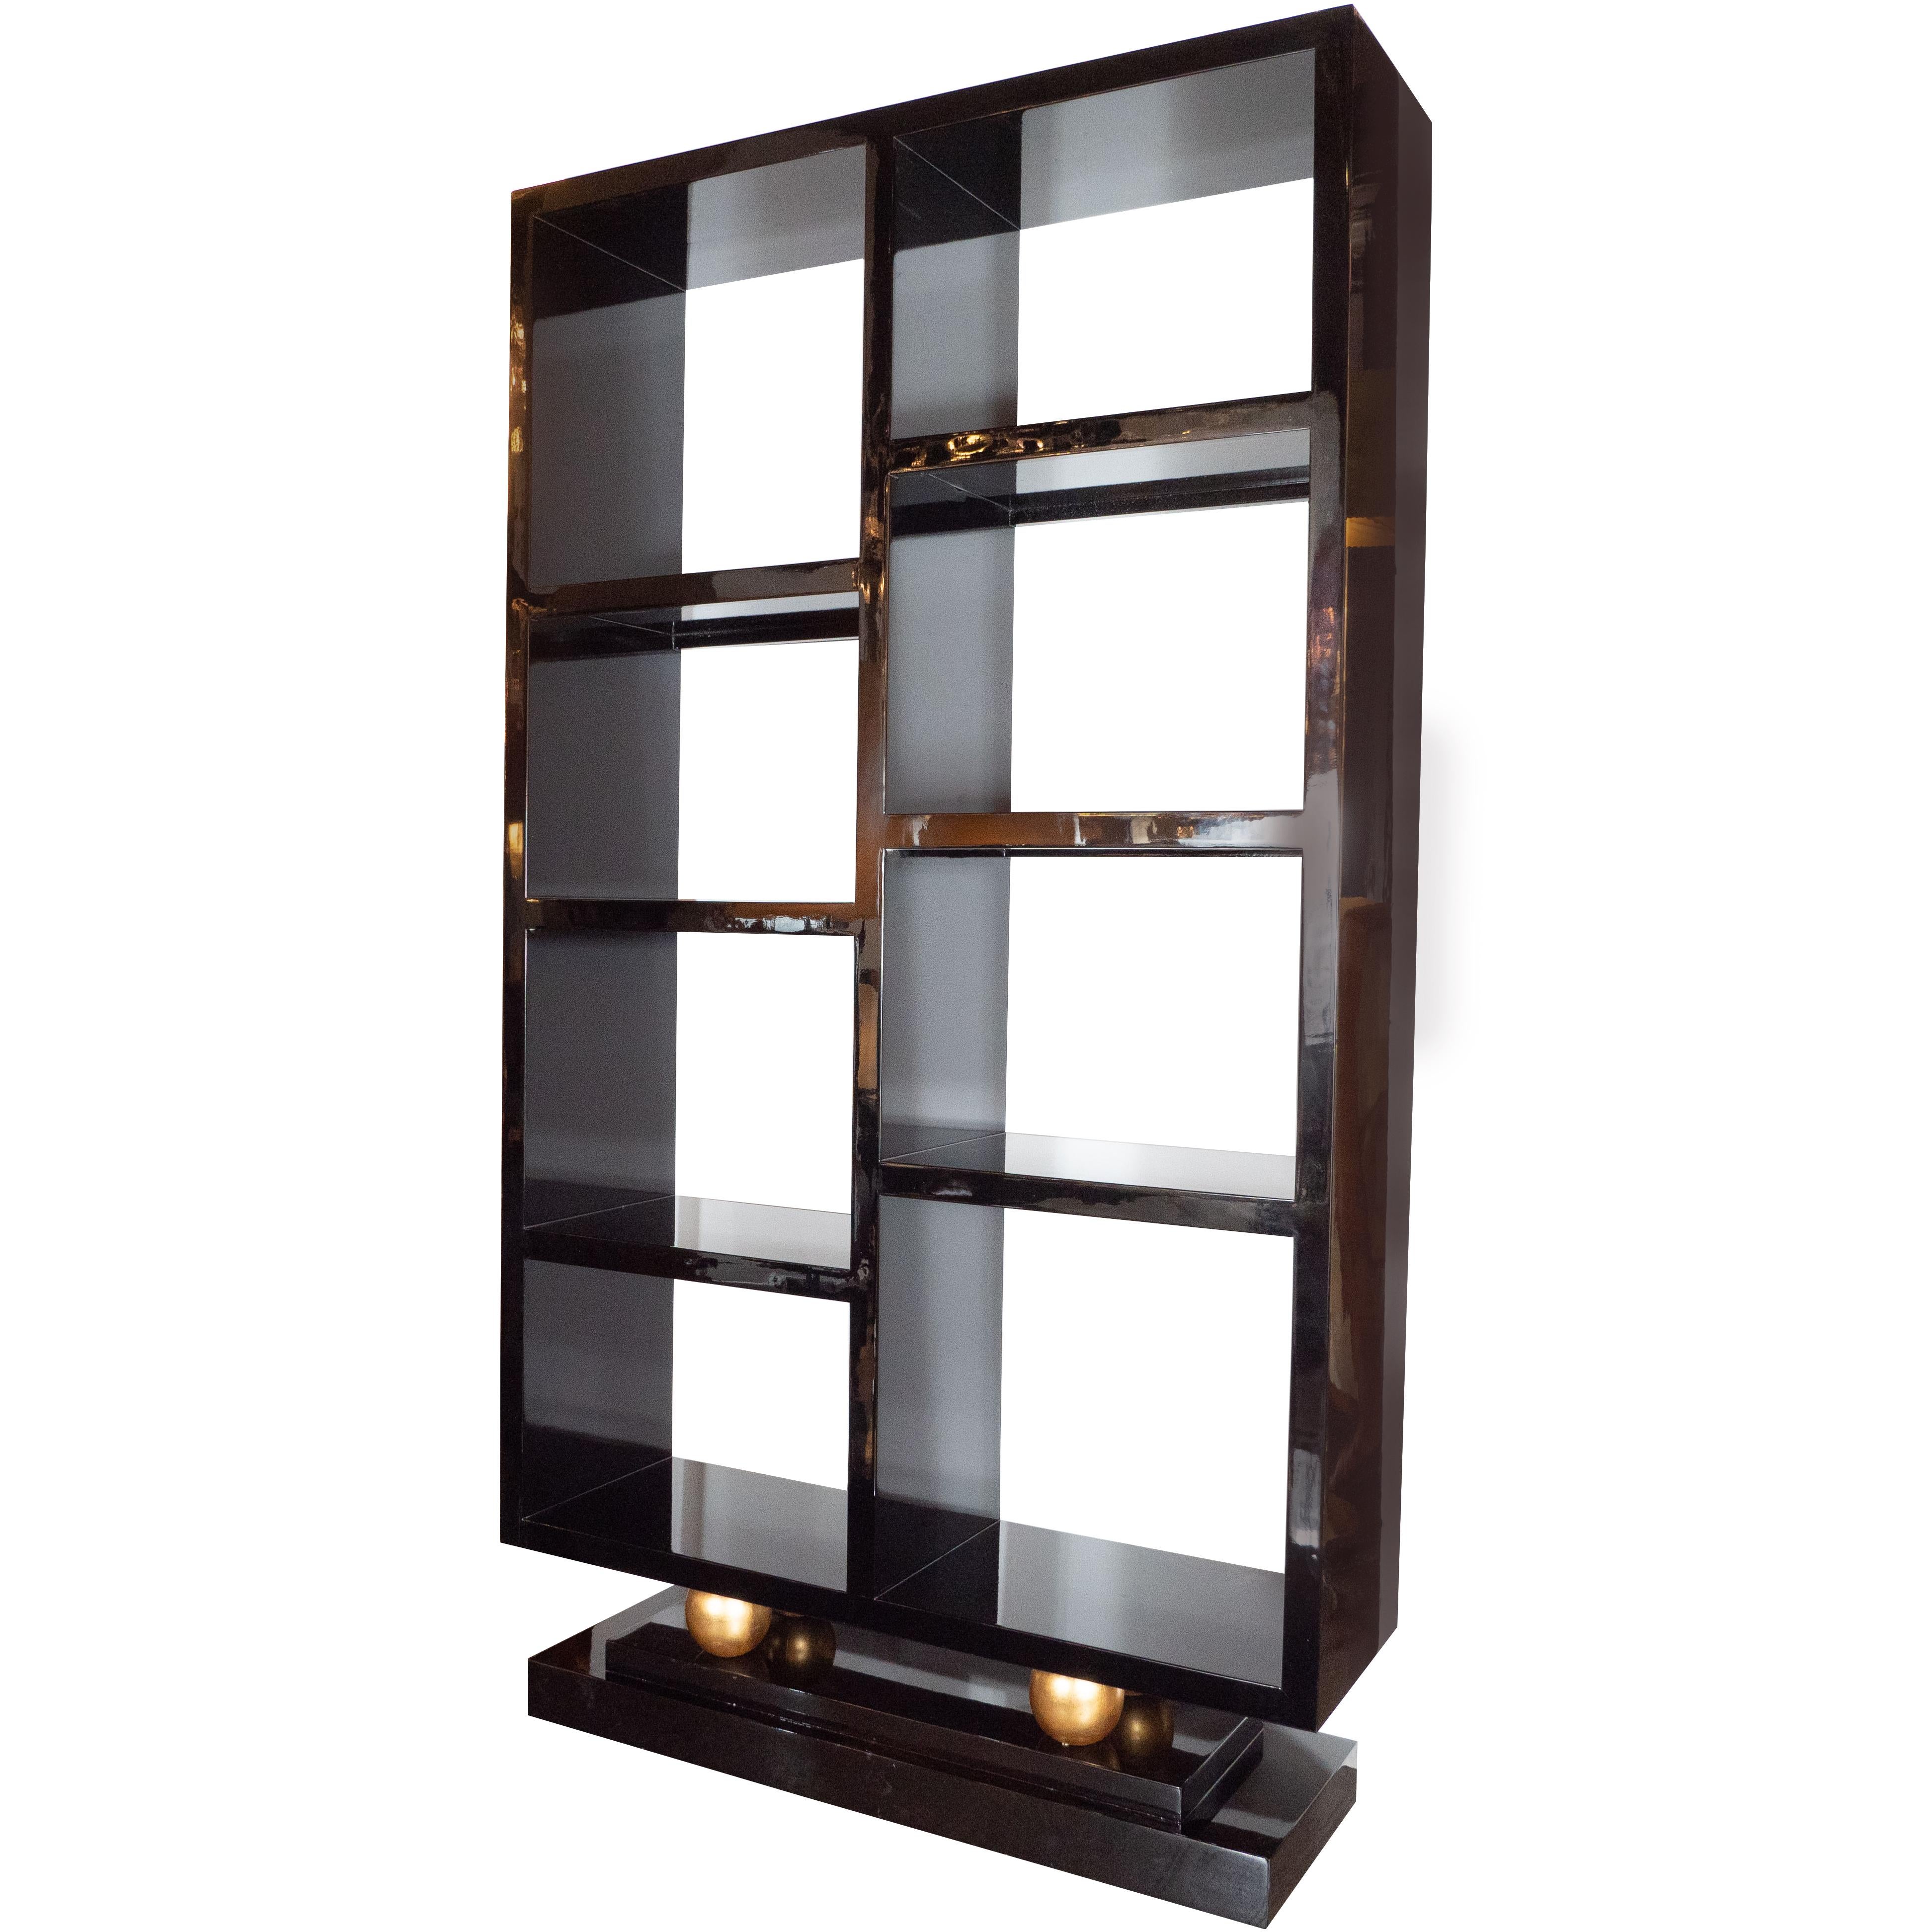 This magnificent Art Deco style étagère or bookshelf was realized in the United States, circa 1935. It features a rectangular body with eight shelves and a skyscraper style base all executed in lustrous black lacquer. Two orbital embellishments,